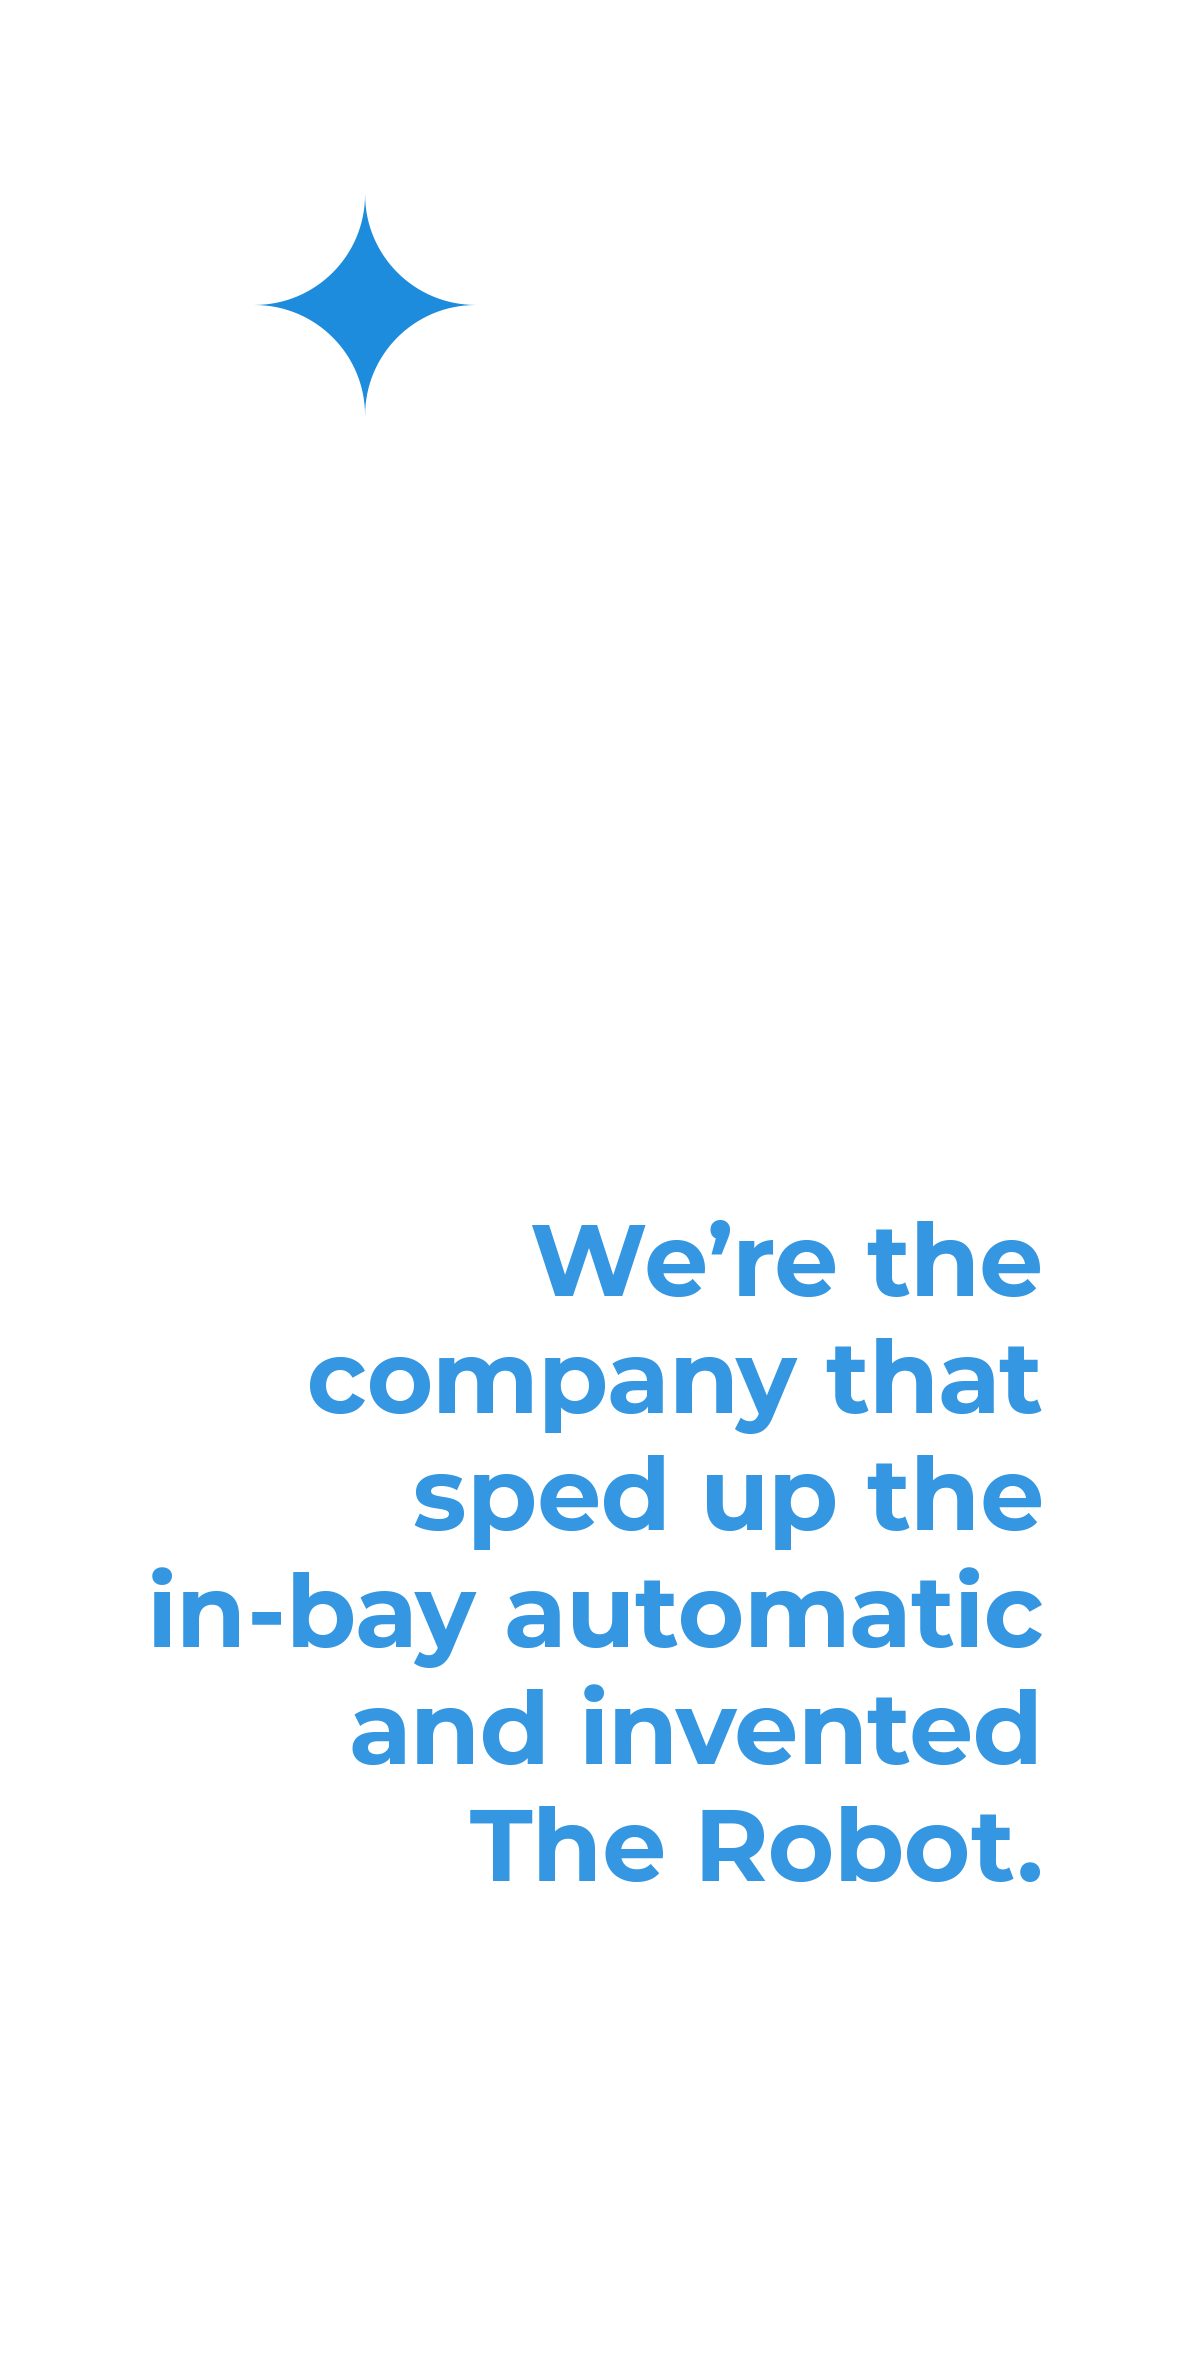 50 years in the car wash industry. We're the company that sped up the inbay automatic and invented The Robot.